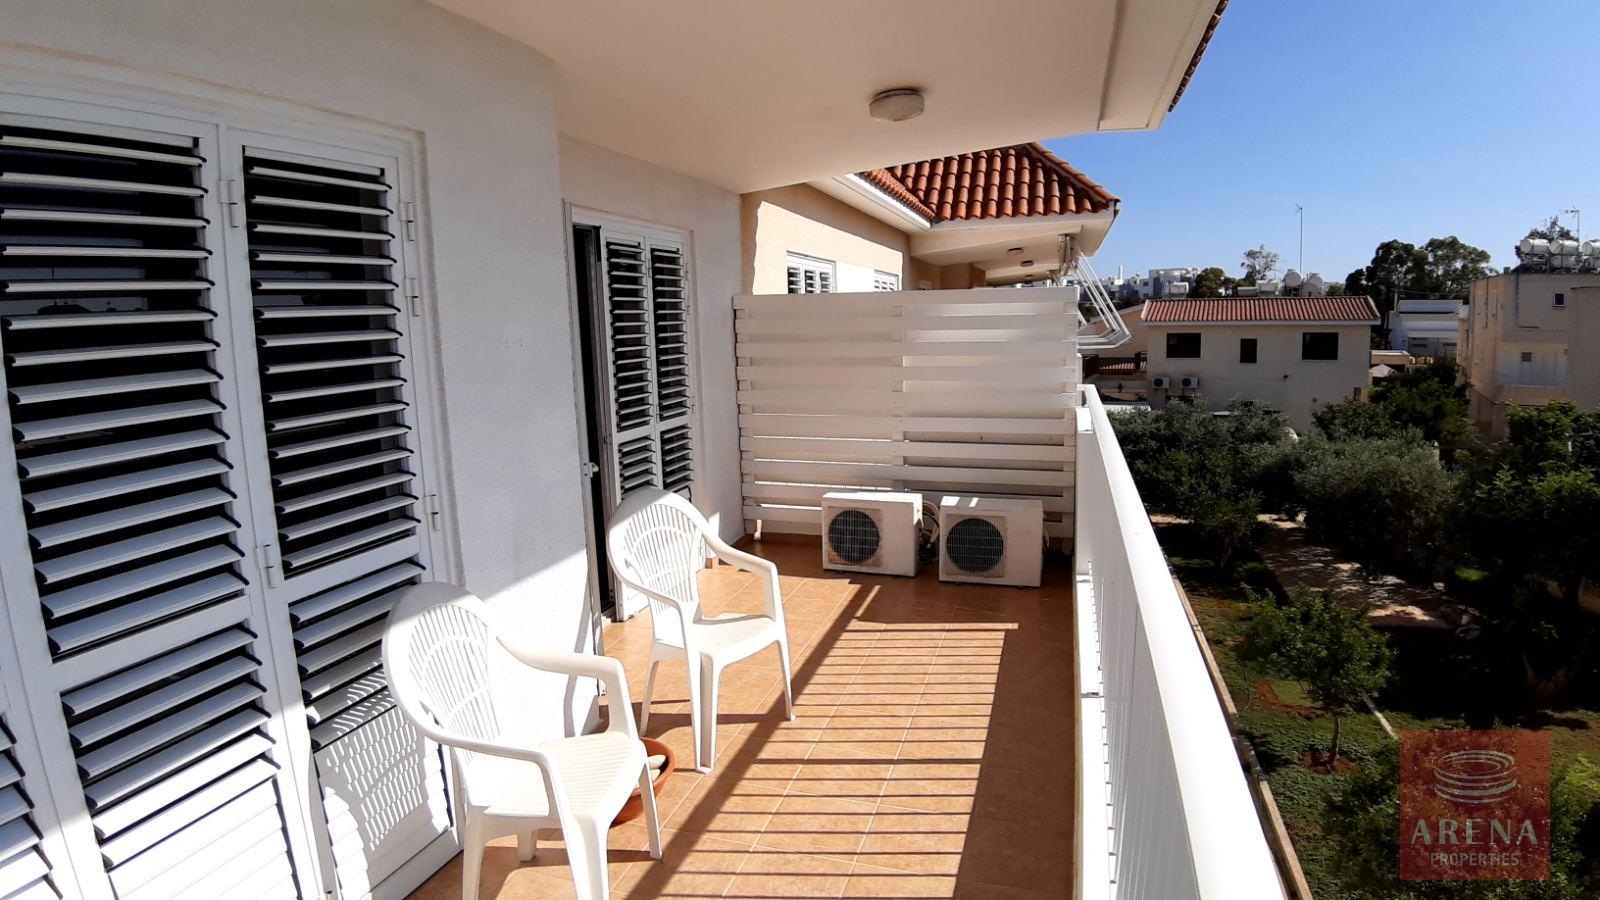 2 Bed Apt for rent in Paralimni - balcony